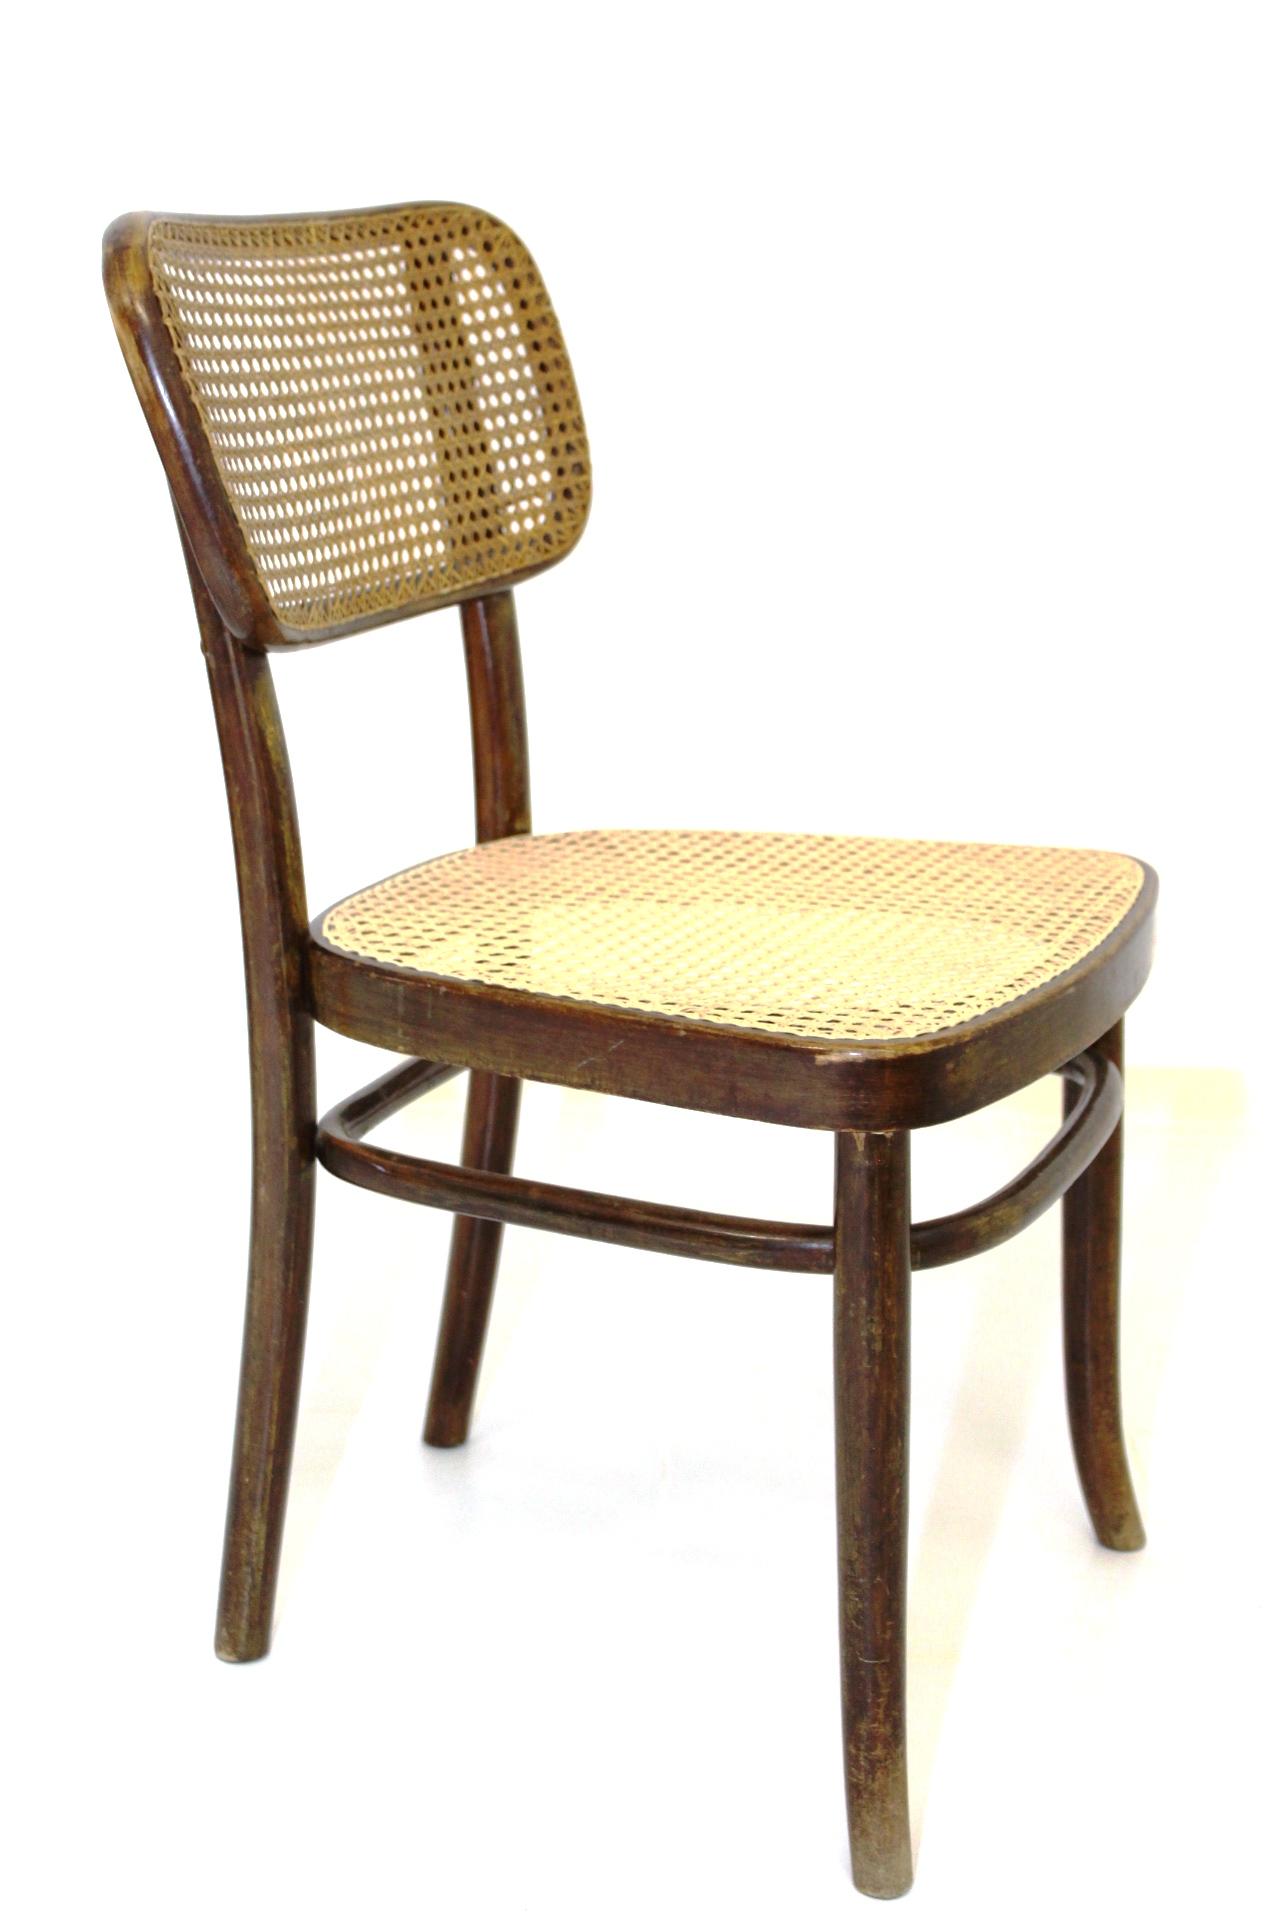 20th Century Chair by Adolf Schneck for Thonet, 1930s For Sale